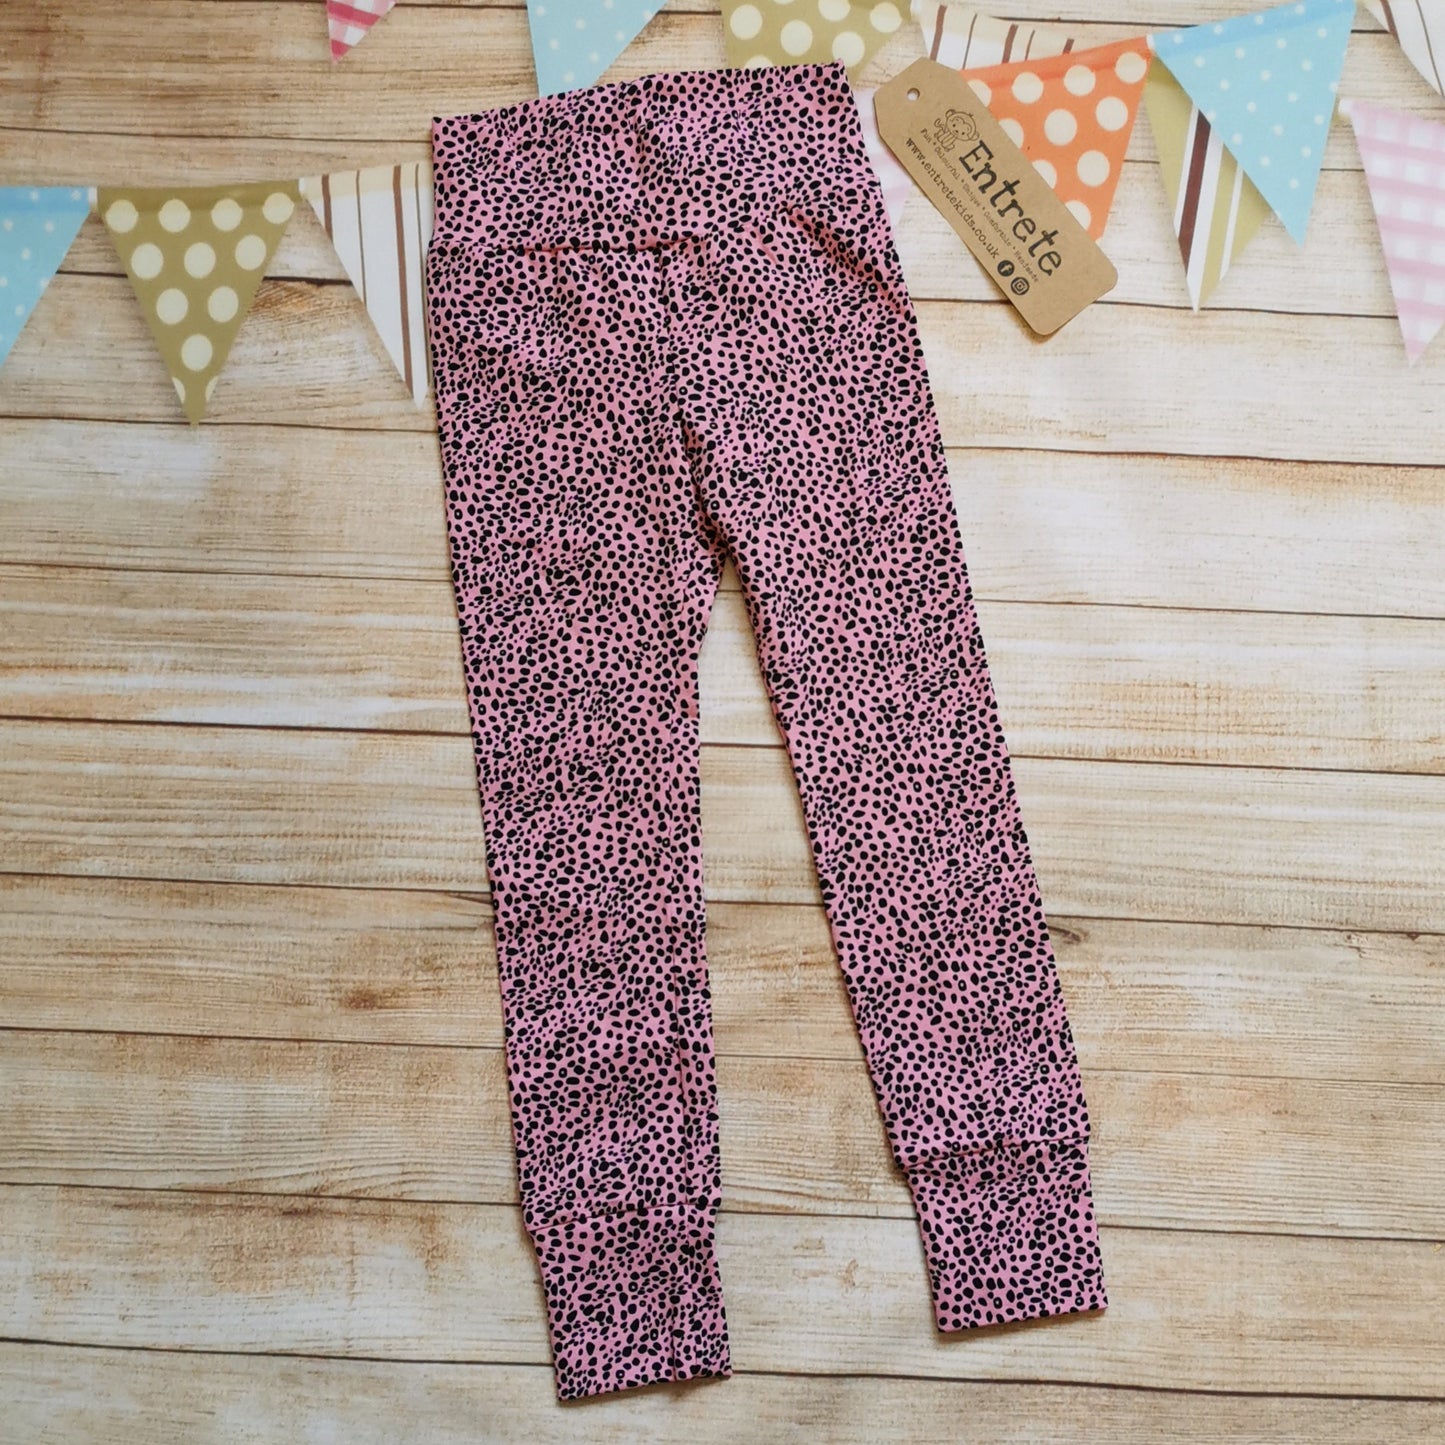 Front view of Child & Babies Leggings, handmade using sumptuous pink cheetah cotton jersey.